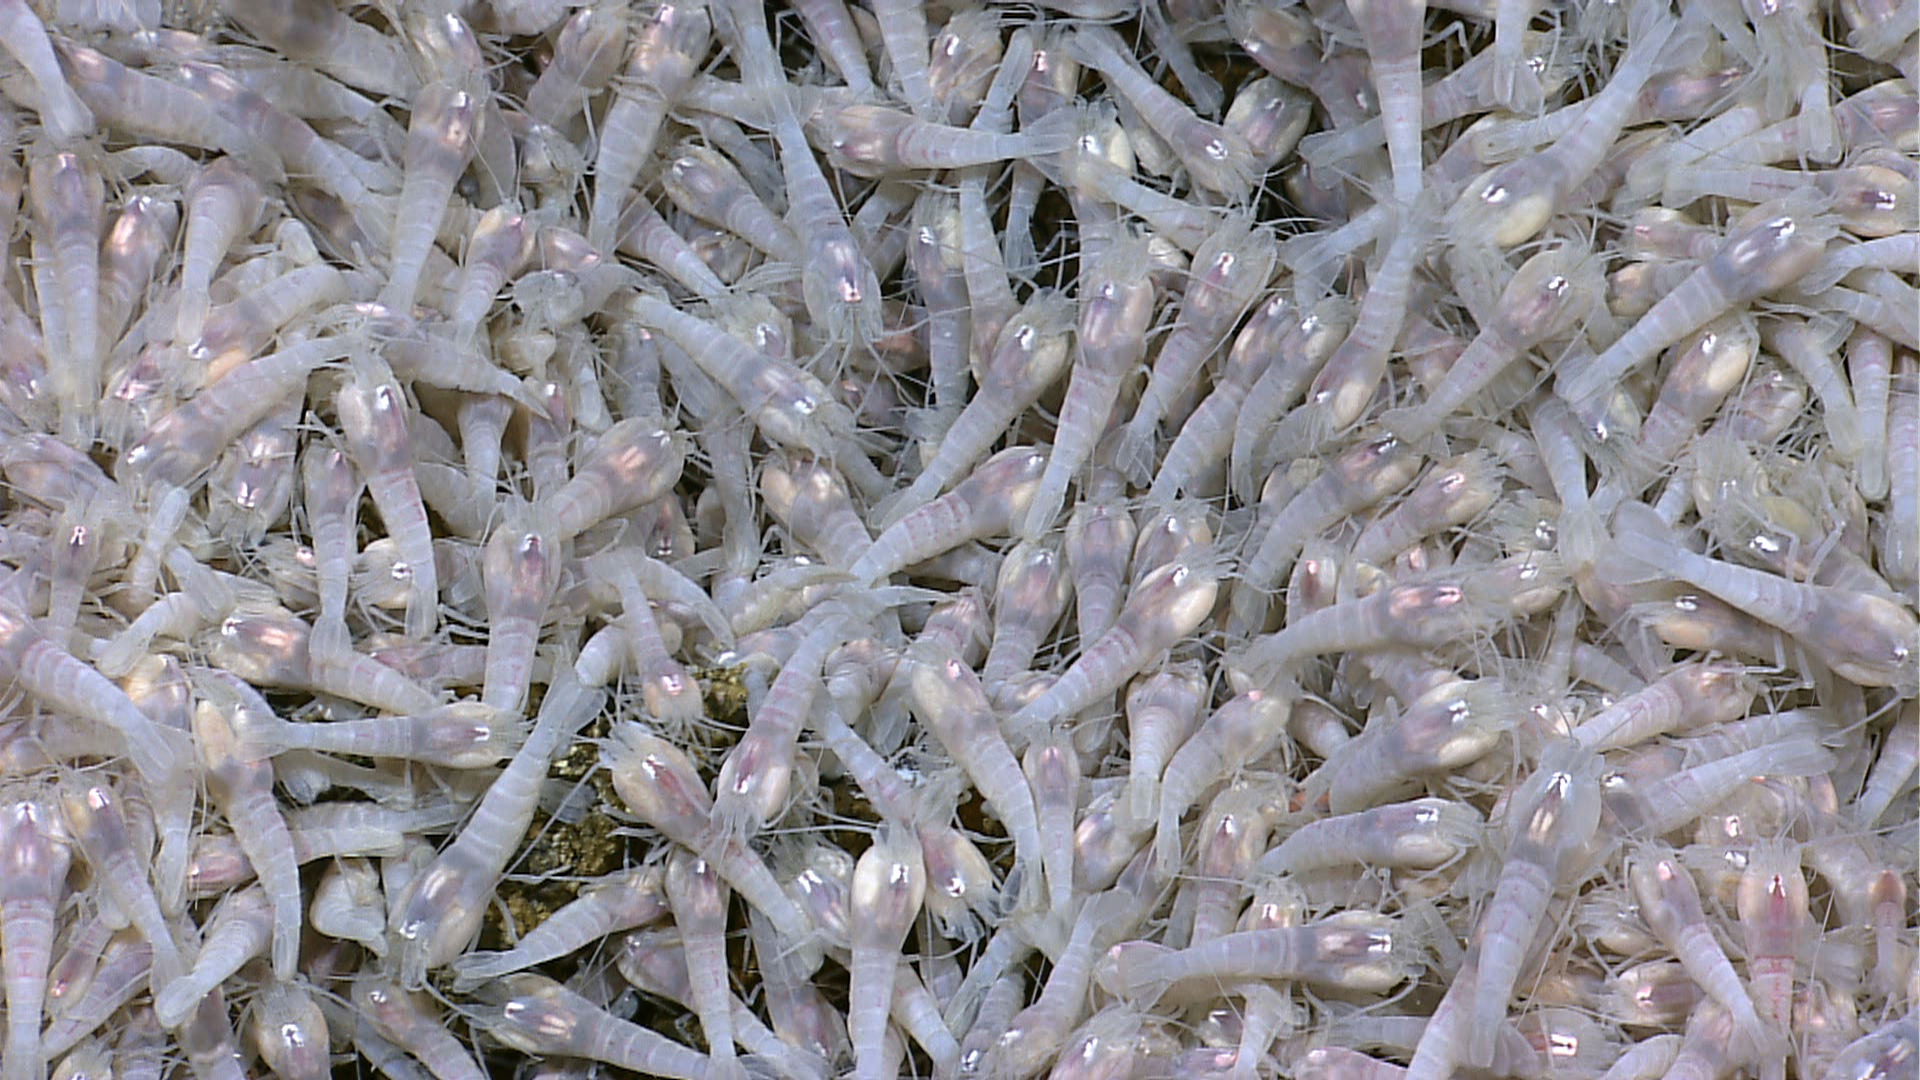 Look closely. These are shrimp! These Rimicaris sp. shrimp were seen clustered around an area of diffuse fluid flow at the Von Damm vent site, located in the Caribbean Sea’s Mid-Cayman Rise. These shrimp are about 10 centimeters (4 inches) long and eat chemosynthetic bacteria that are grown on their bodies.